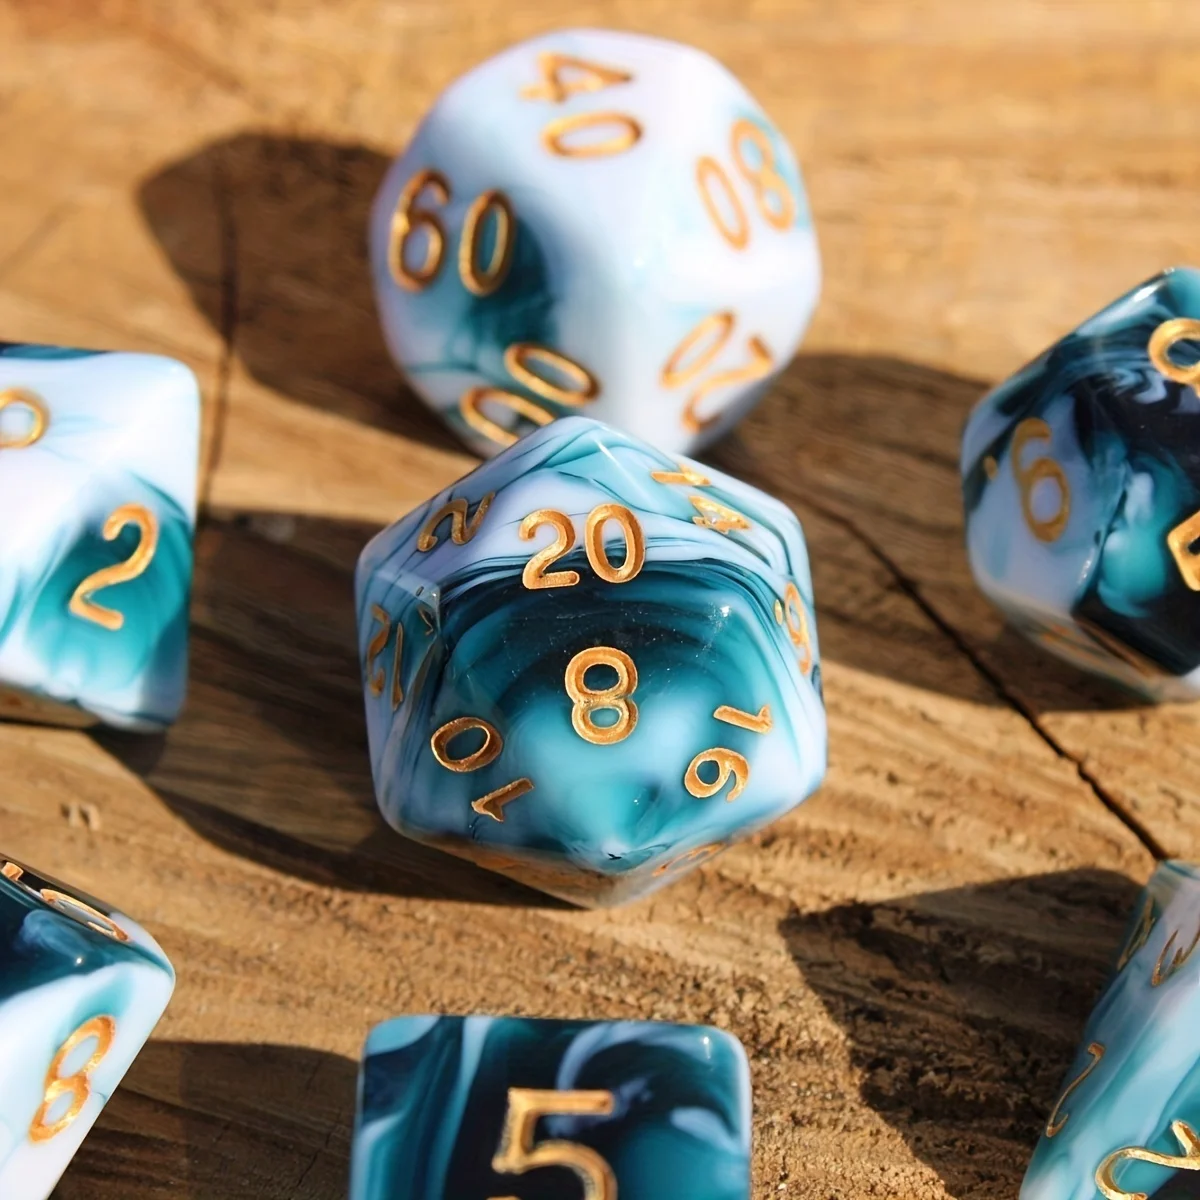 7Pcs/Set Blueberry Marble Dice for DND Dungeons and Dragons Table Games D&D RPG Tabletop Roleplaying